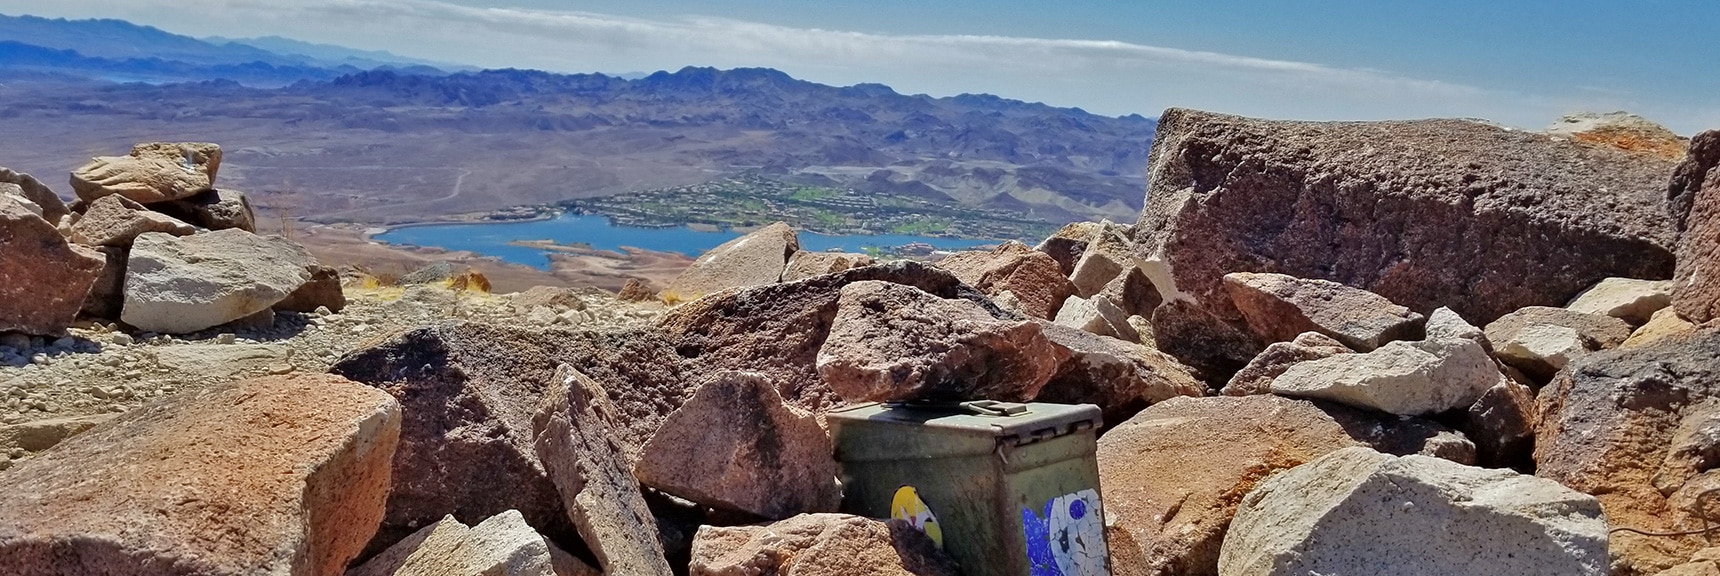 Summit Box on Lava Butte. Lake Las Vegas in Background | Lava Butte | Lake Mead National Recreation Area, Nevada